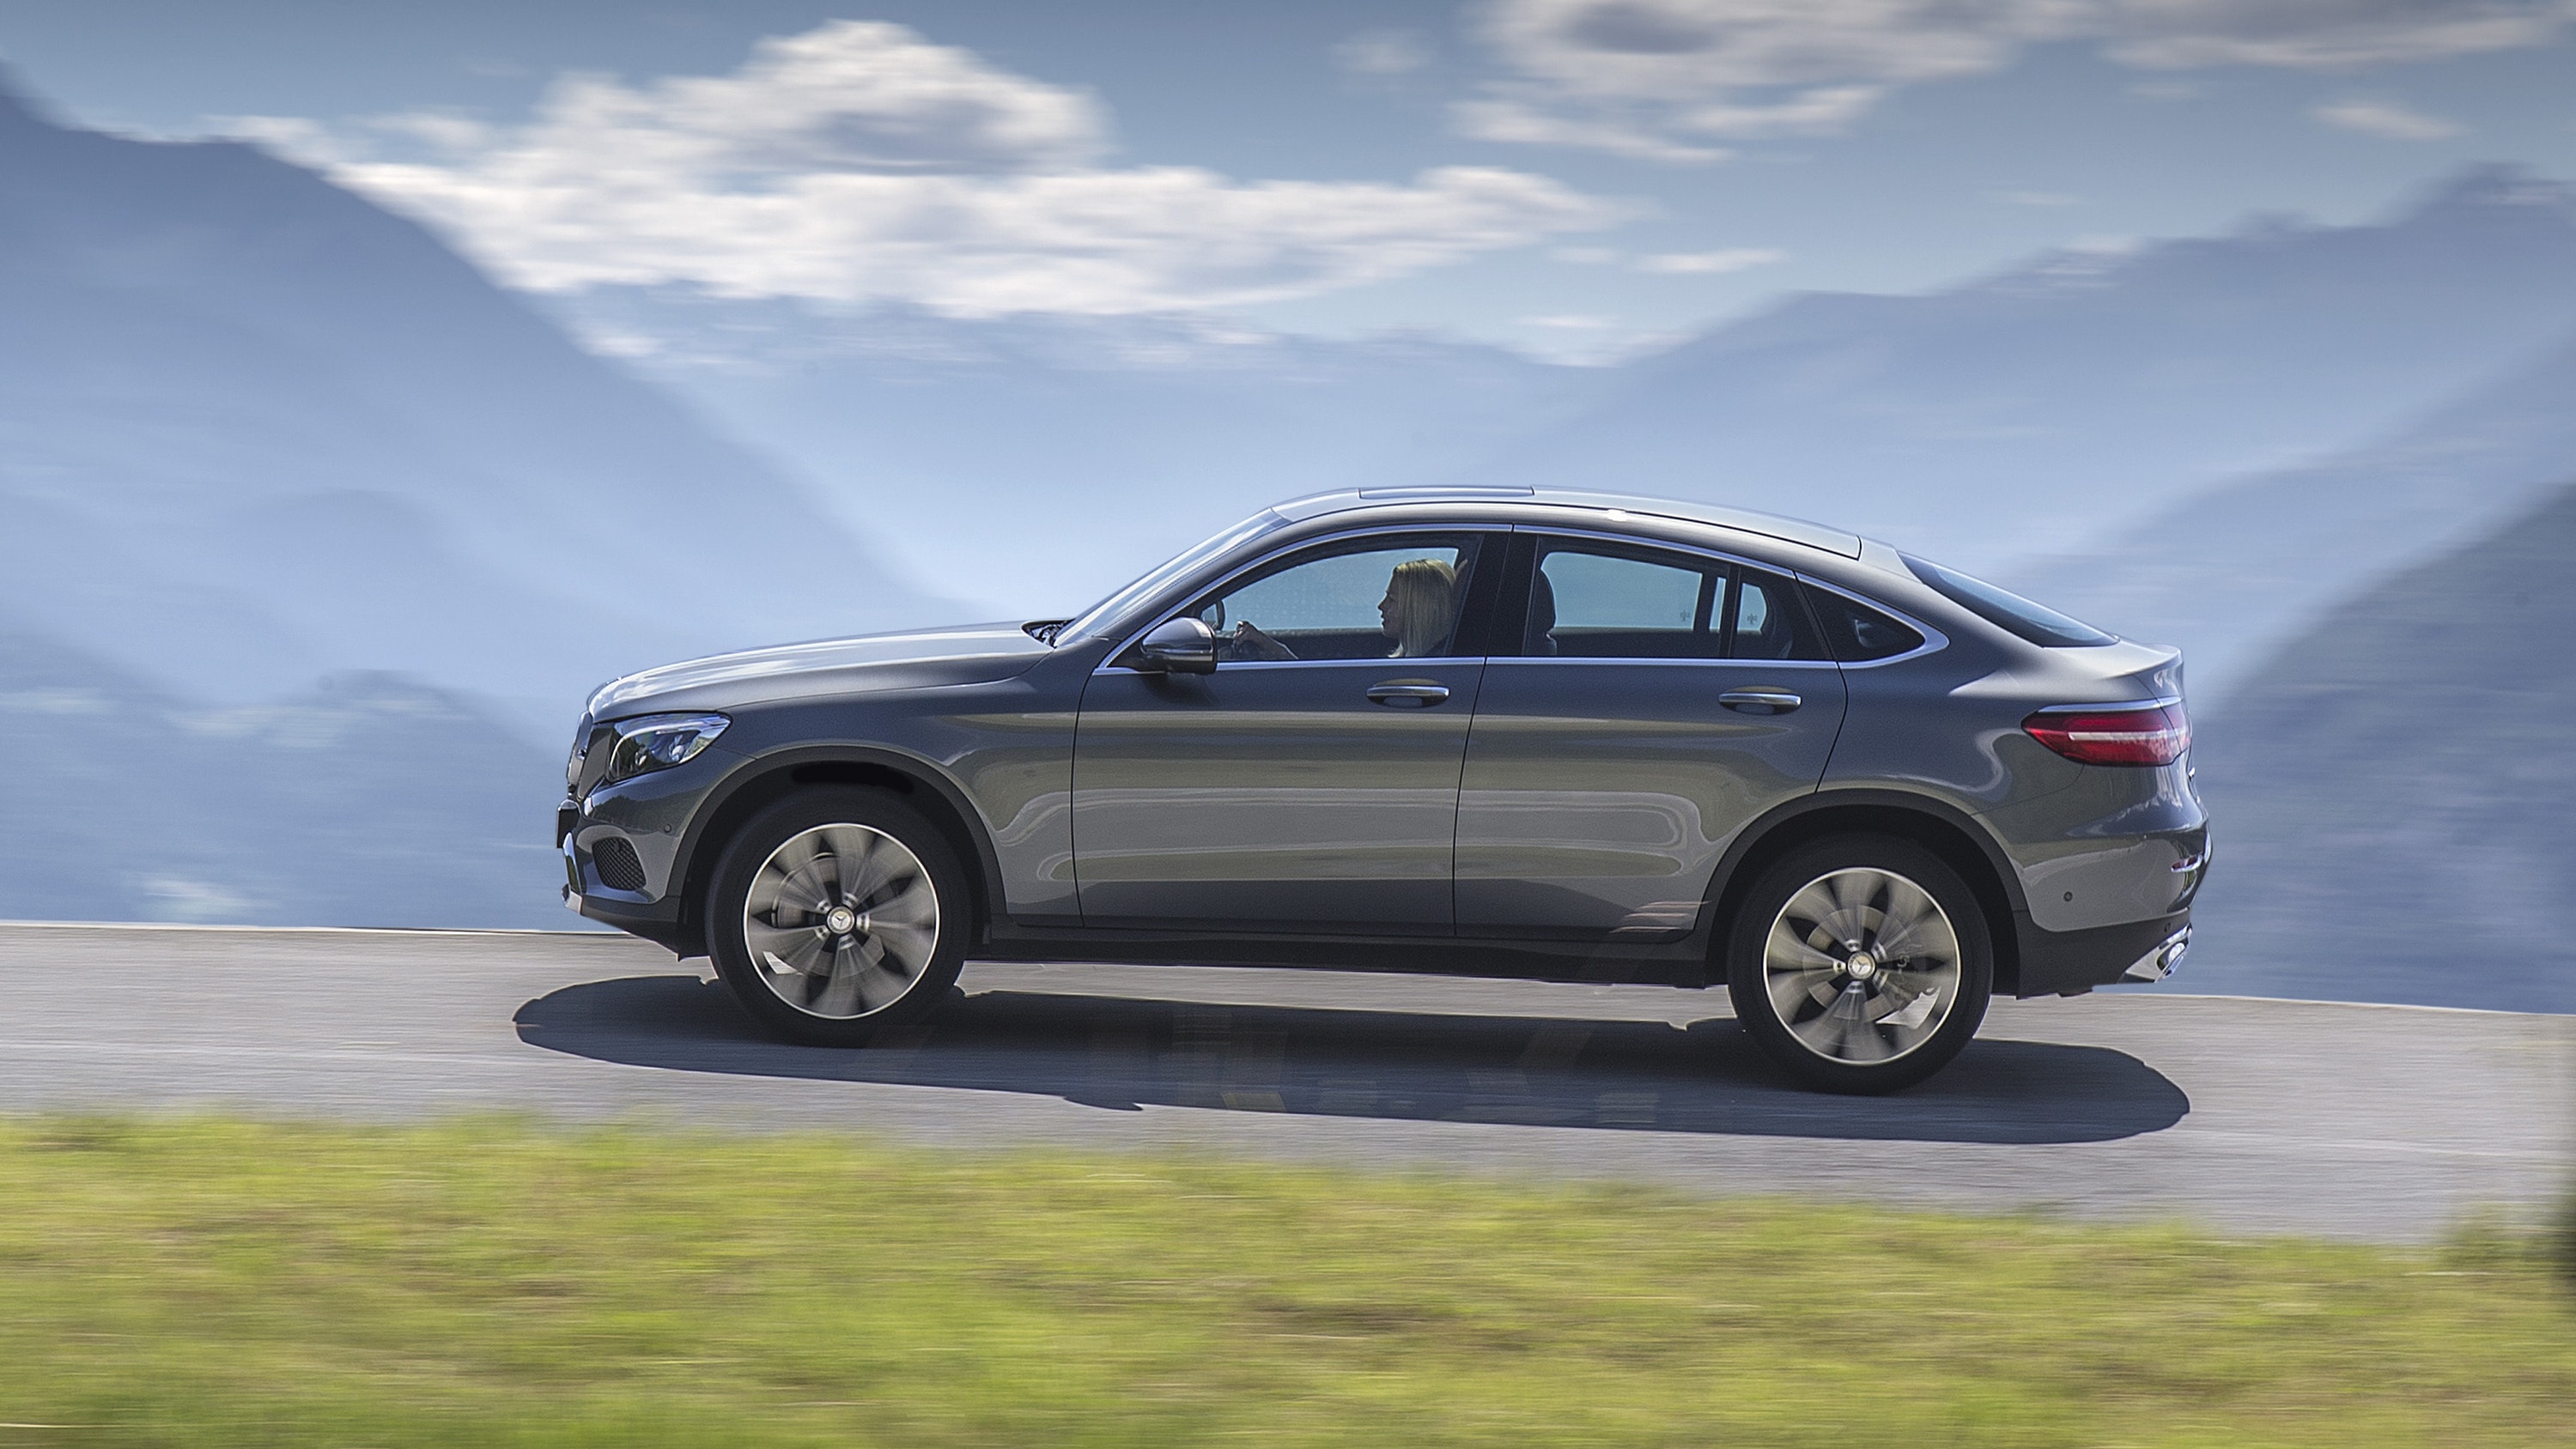 The GLC Coupe features a sleeker shape than the standard GLC